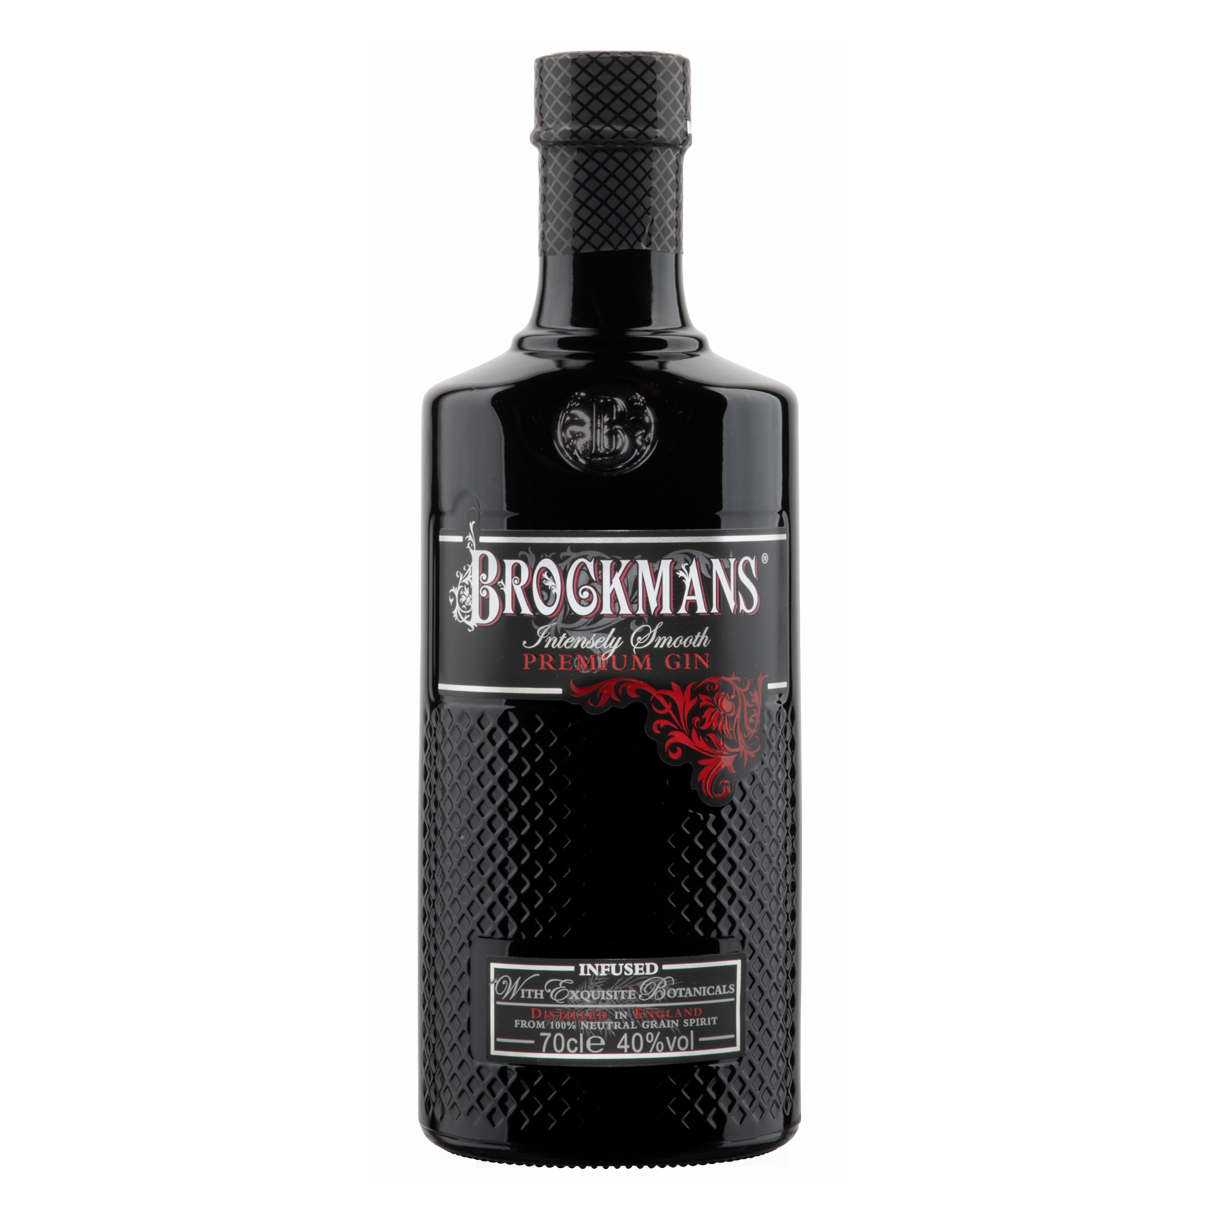 Brockmans Premium Gin Intensely Smooth 70cl